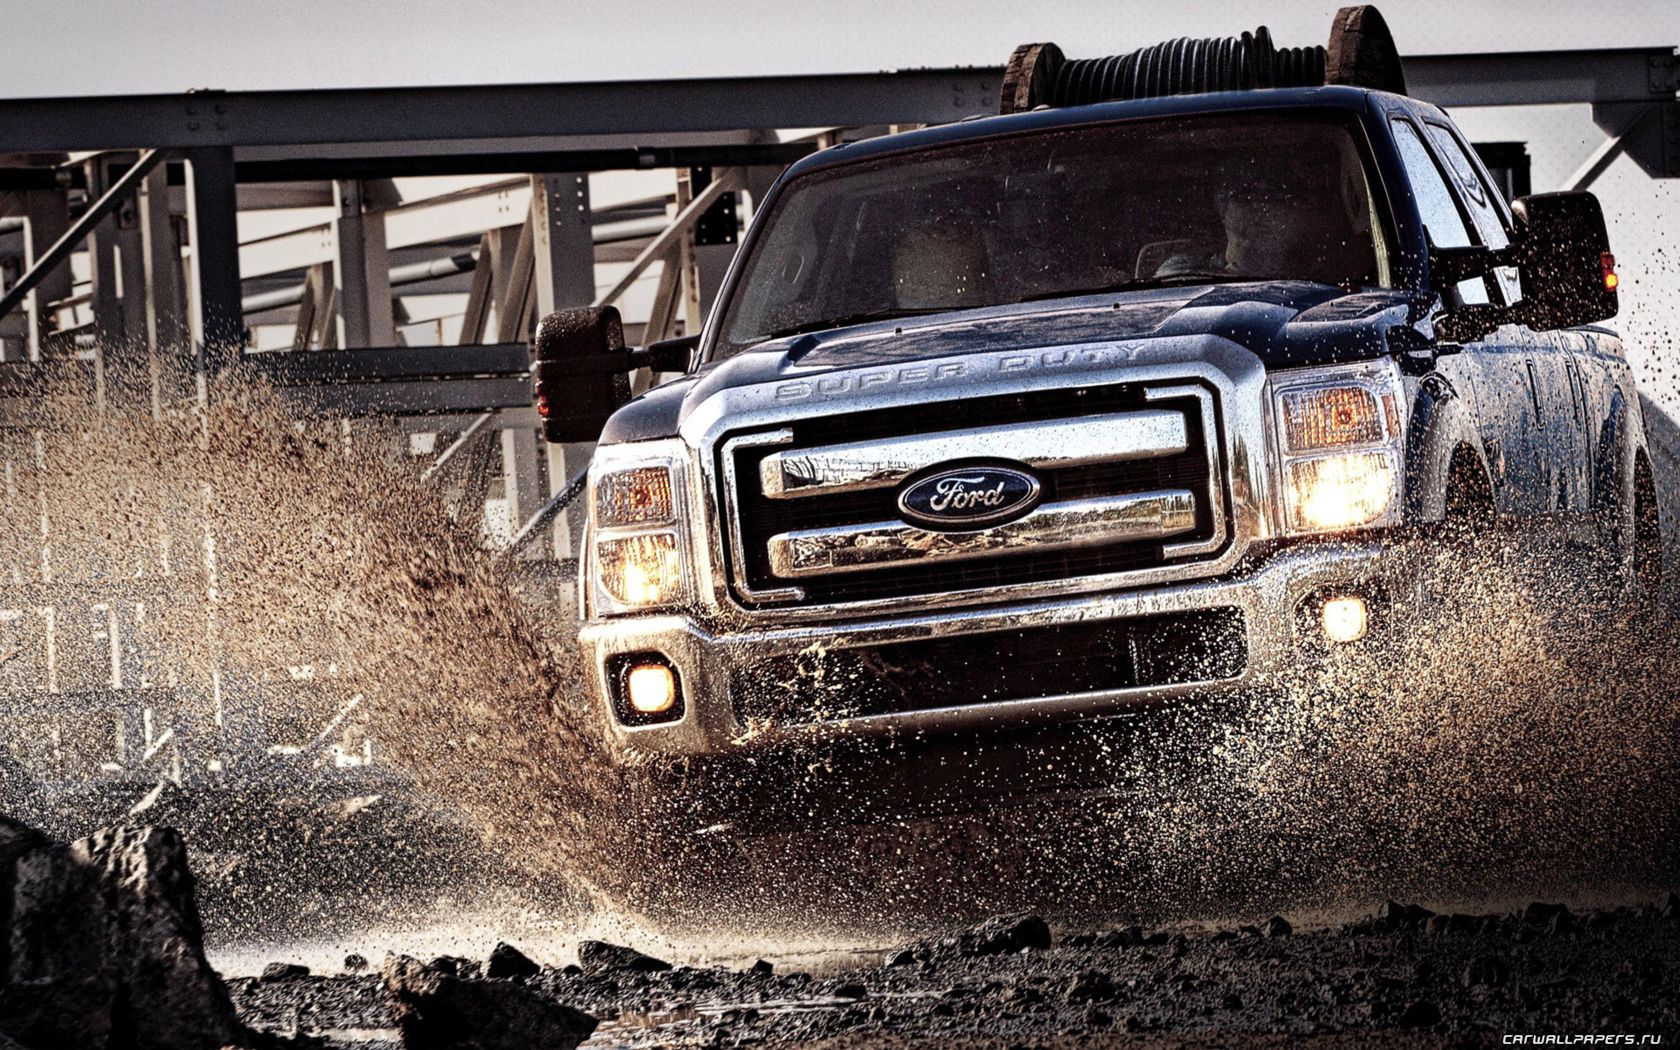 Ford F350 Wallpaper Nf78xzvkm Projects To Try Diesel